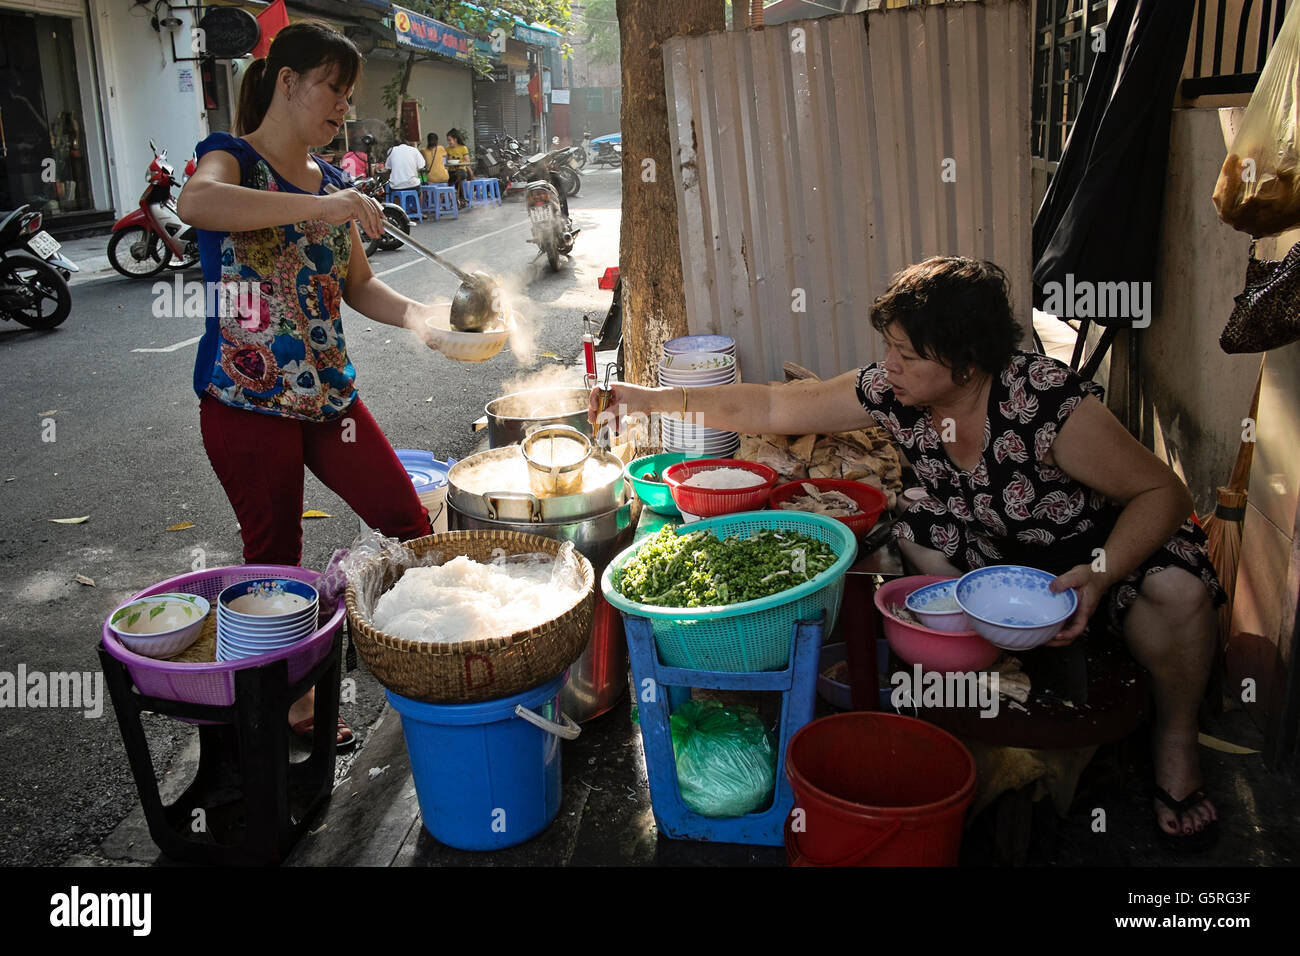 Two middle aged women serve rice, noodles and vegetables at a street stall in the Old Quarter of Hanoi, Hoan Kiem, Vietnam Stock Photo